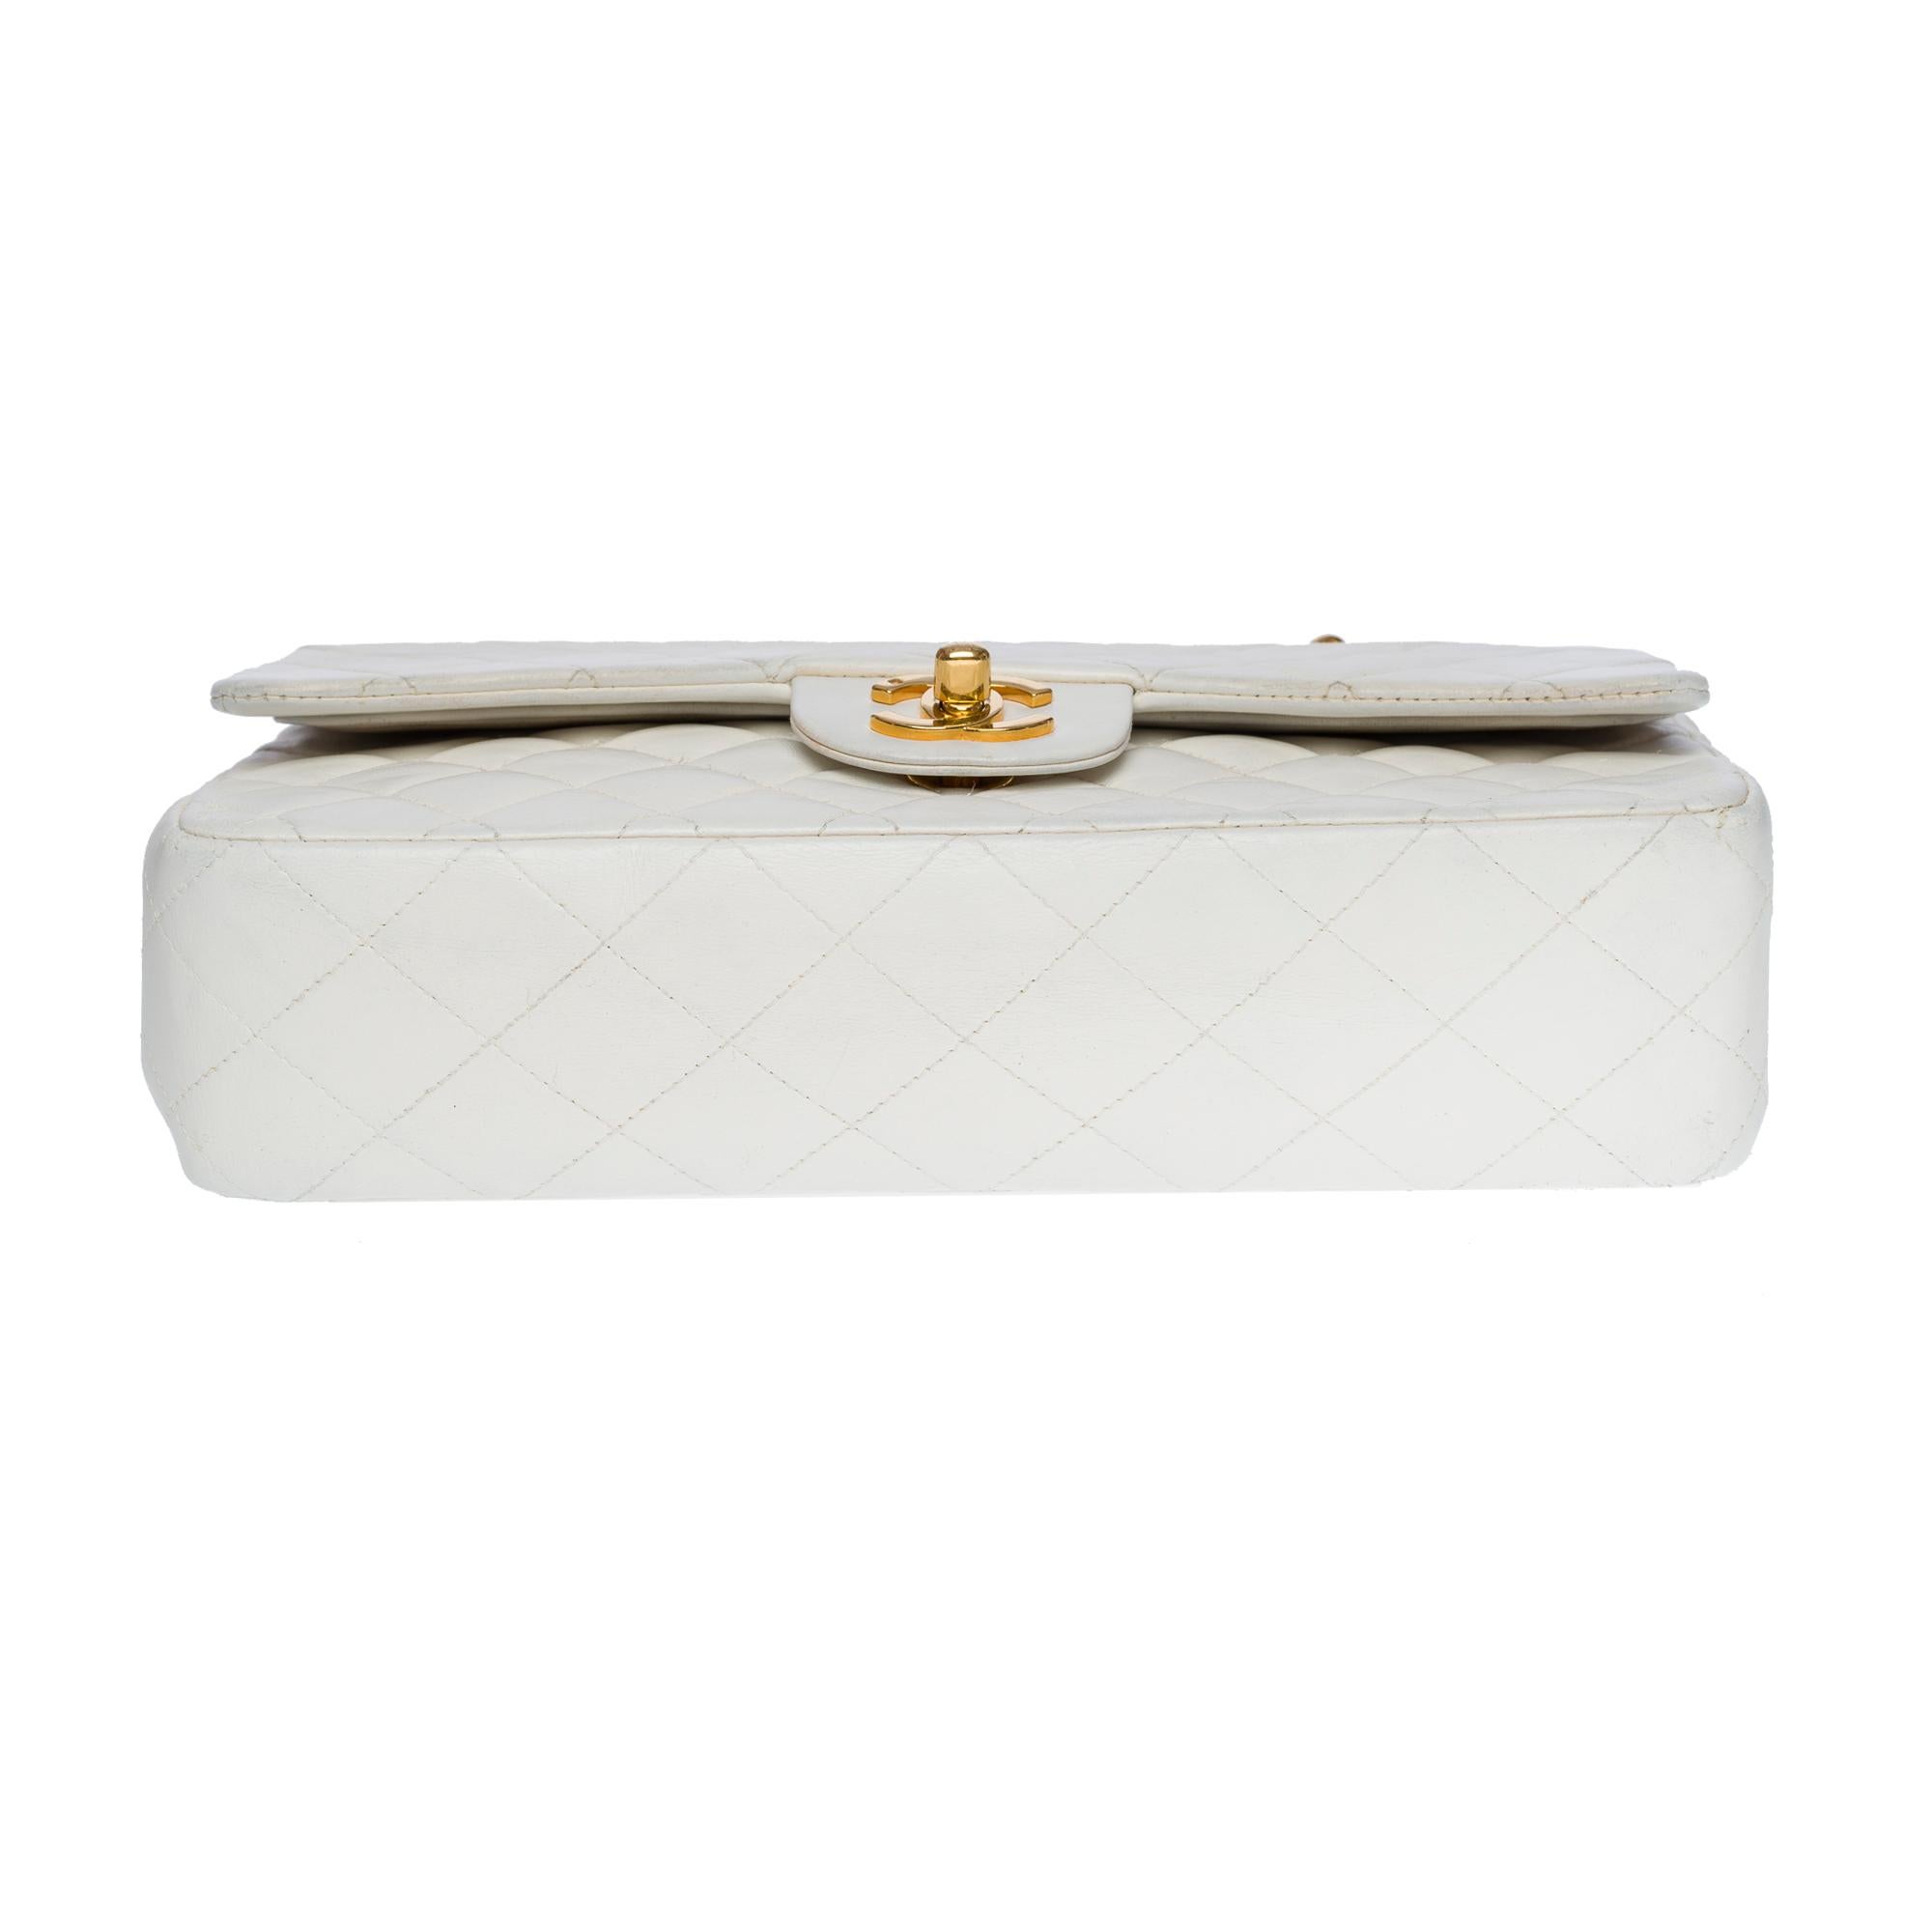 Chanel Timeless Medium double flap Shoulder bag in White quilted lambskin, GHW 5